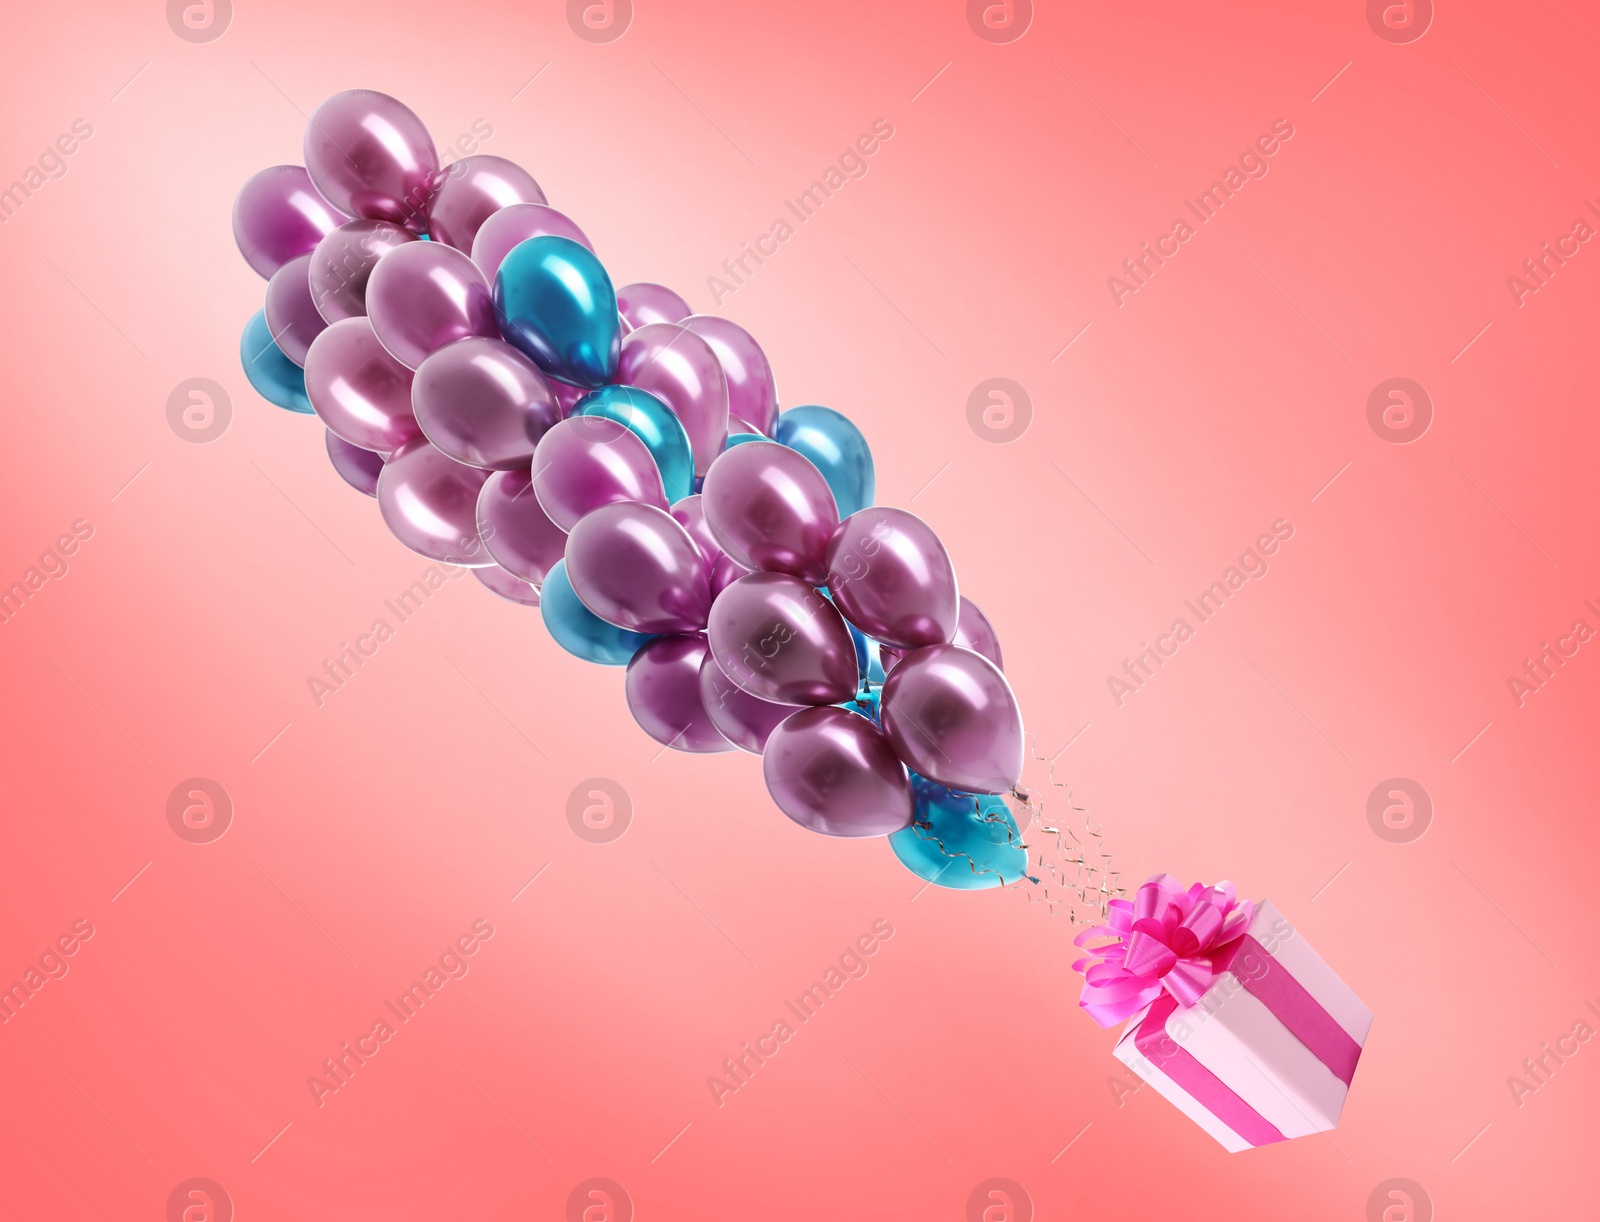 Image of Many balloons tied to pink gift box on pink background